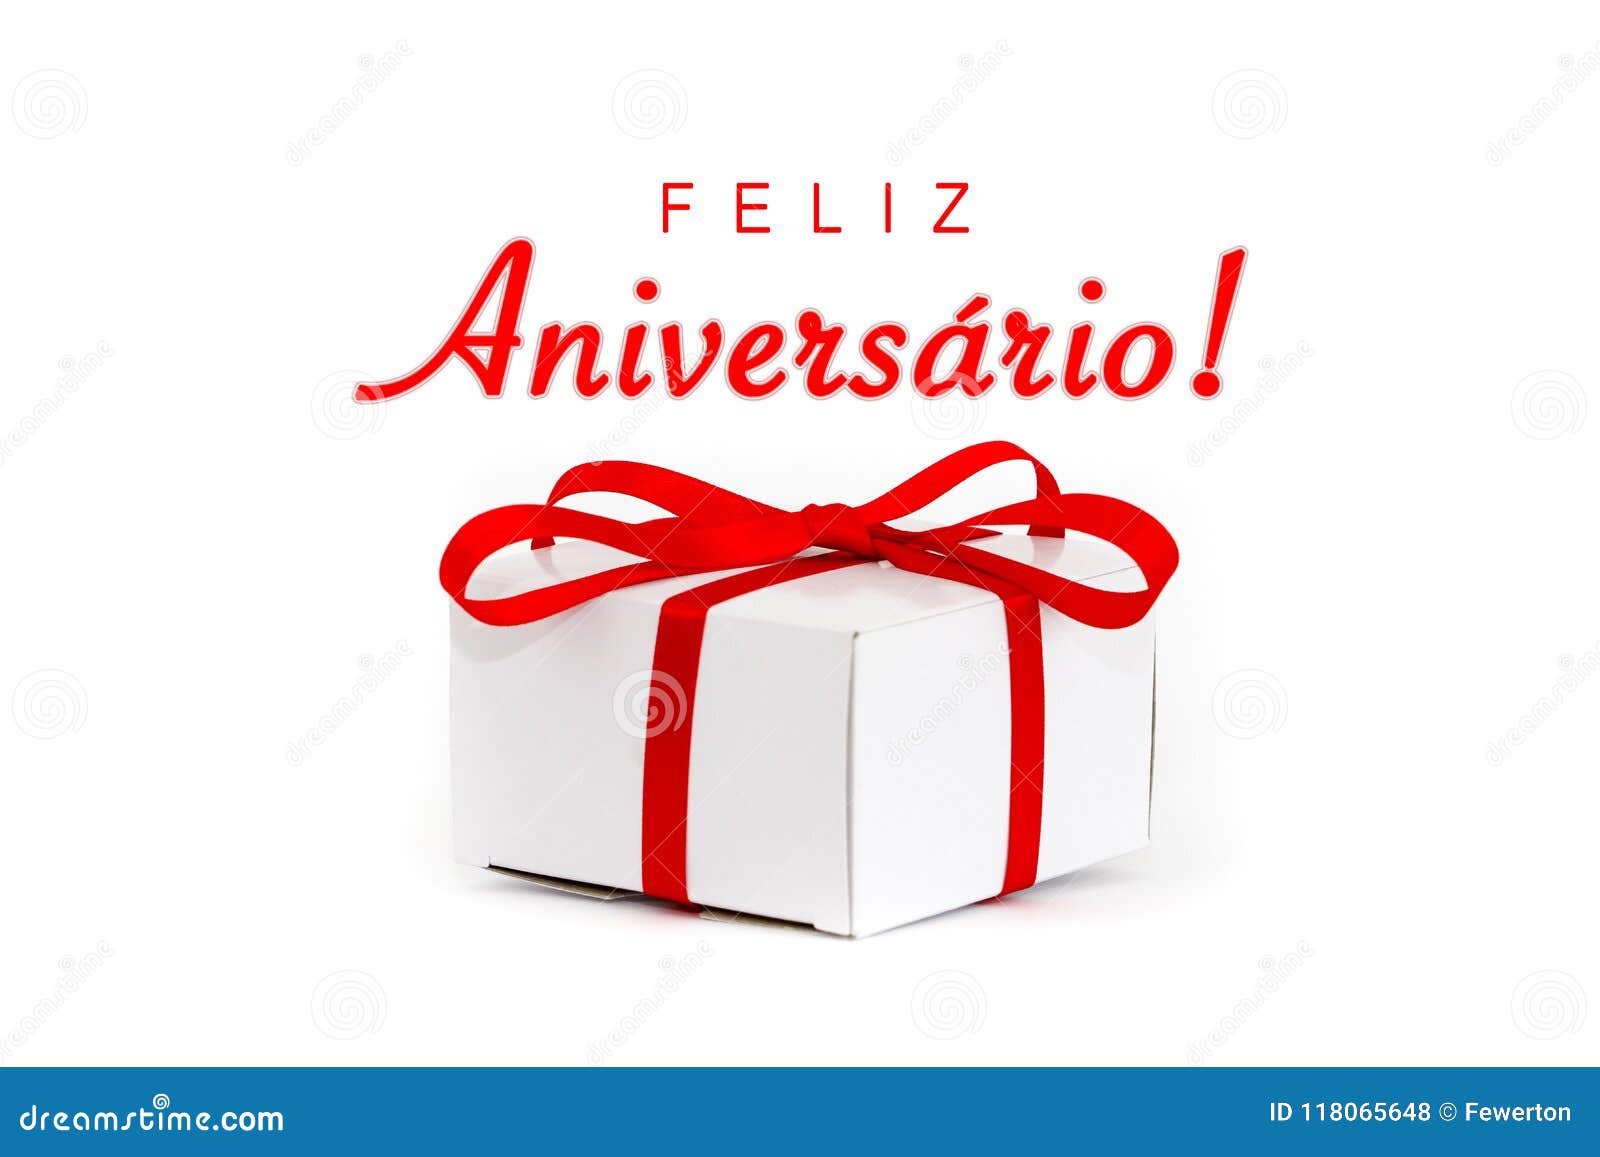 feliz aniversario! in portuguese language: happy birthday! text message and white cardboard gift box with decorative red ribbon